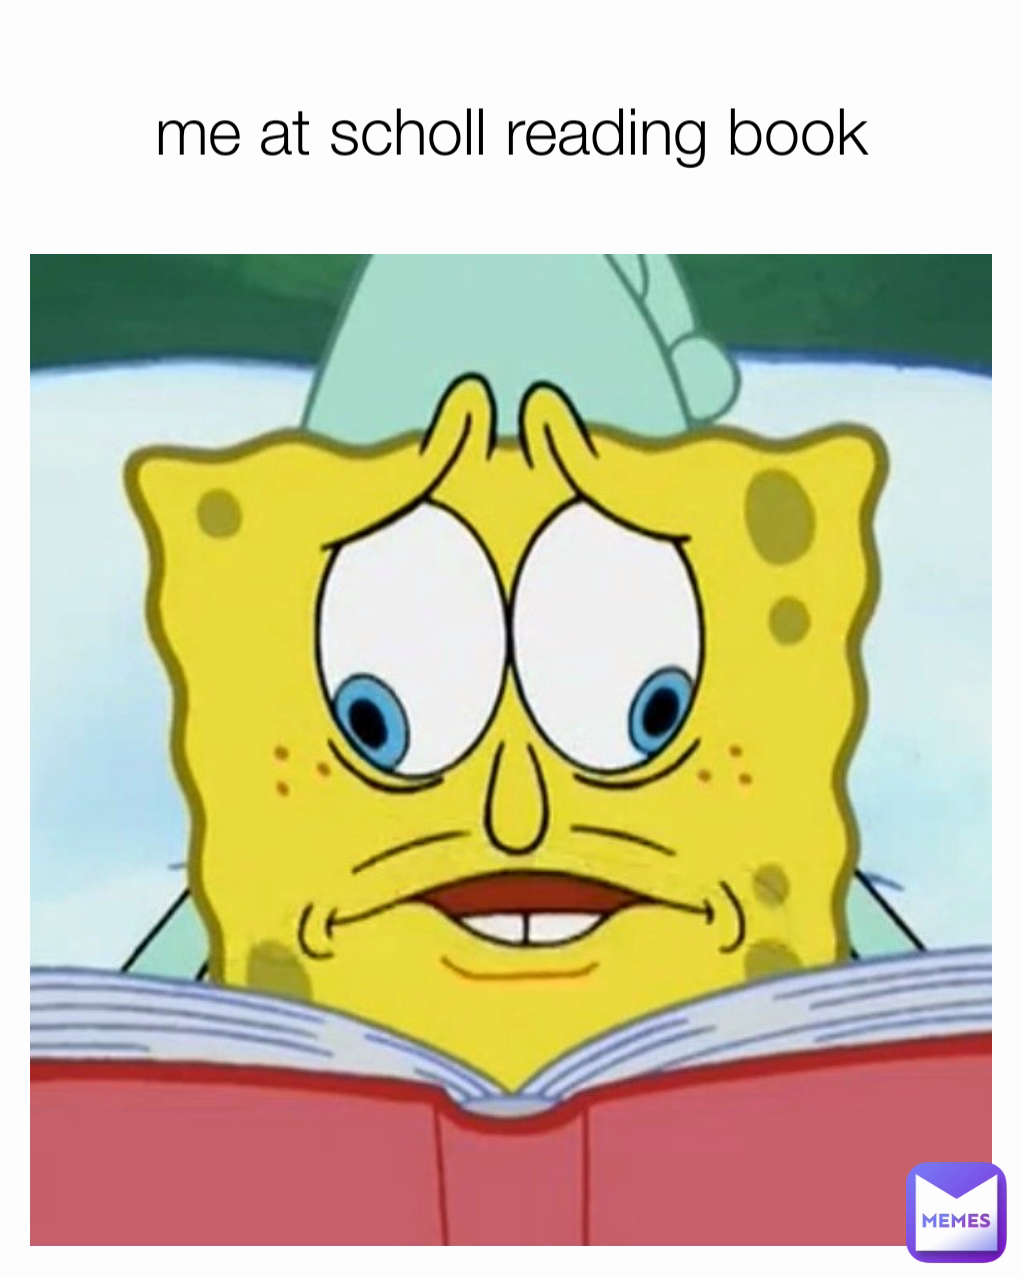 me at scholl reading book